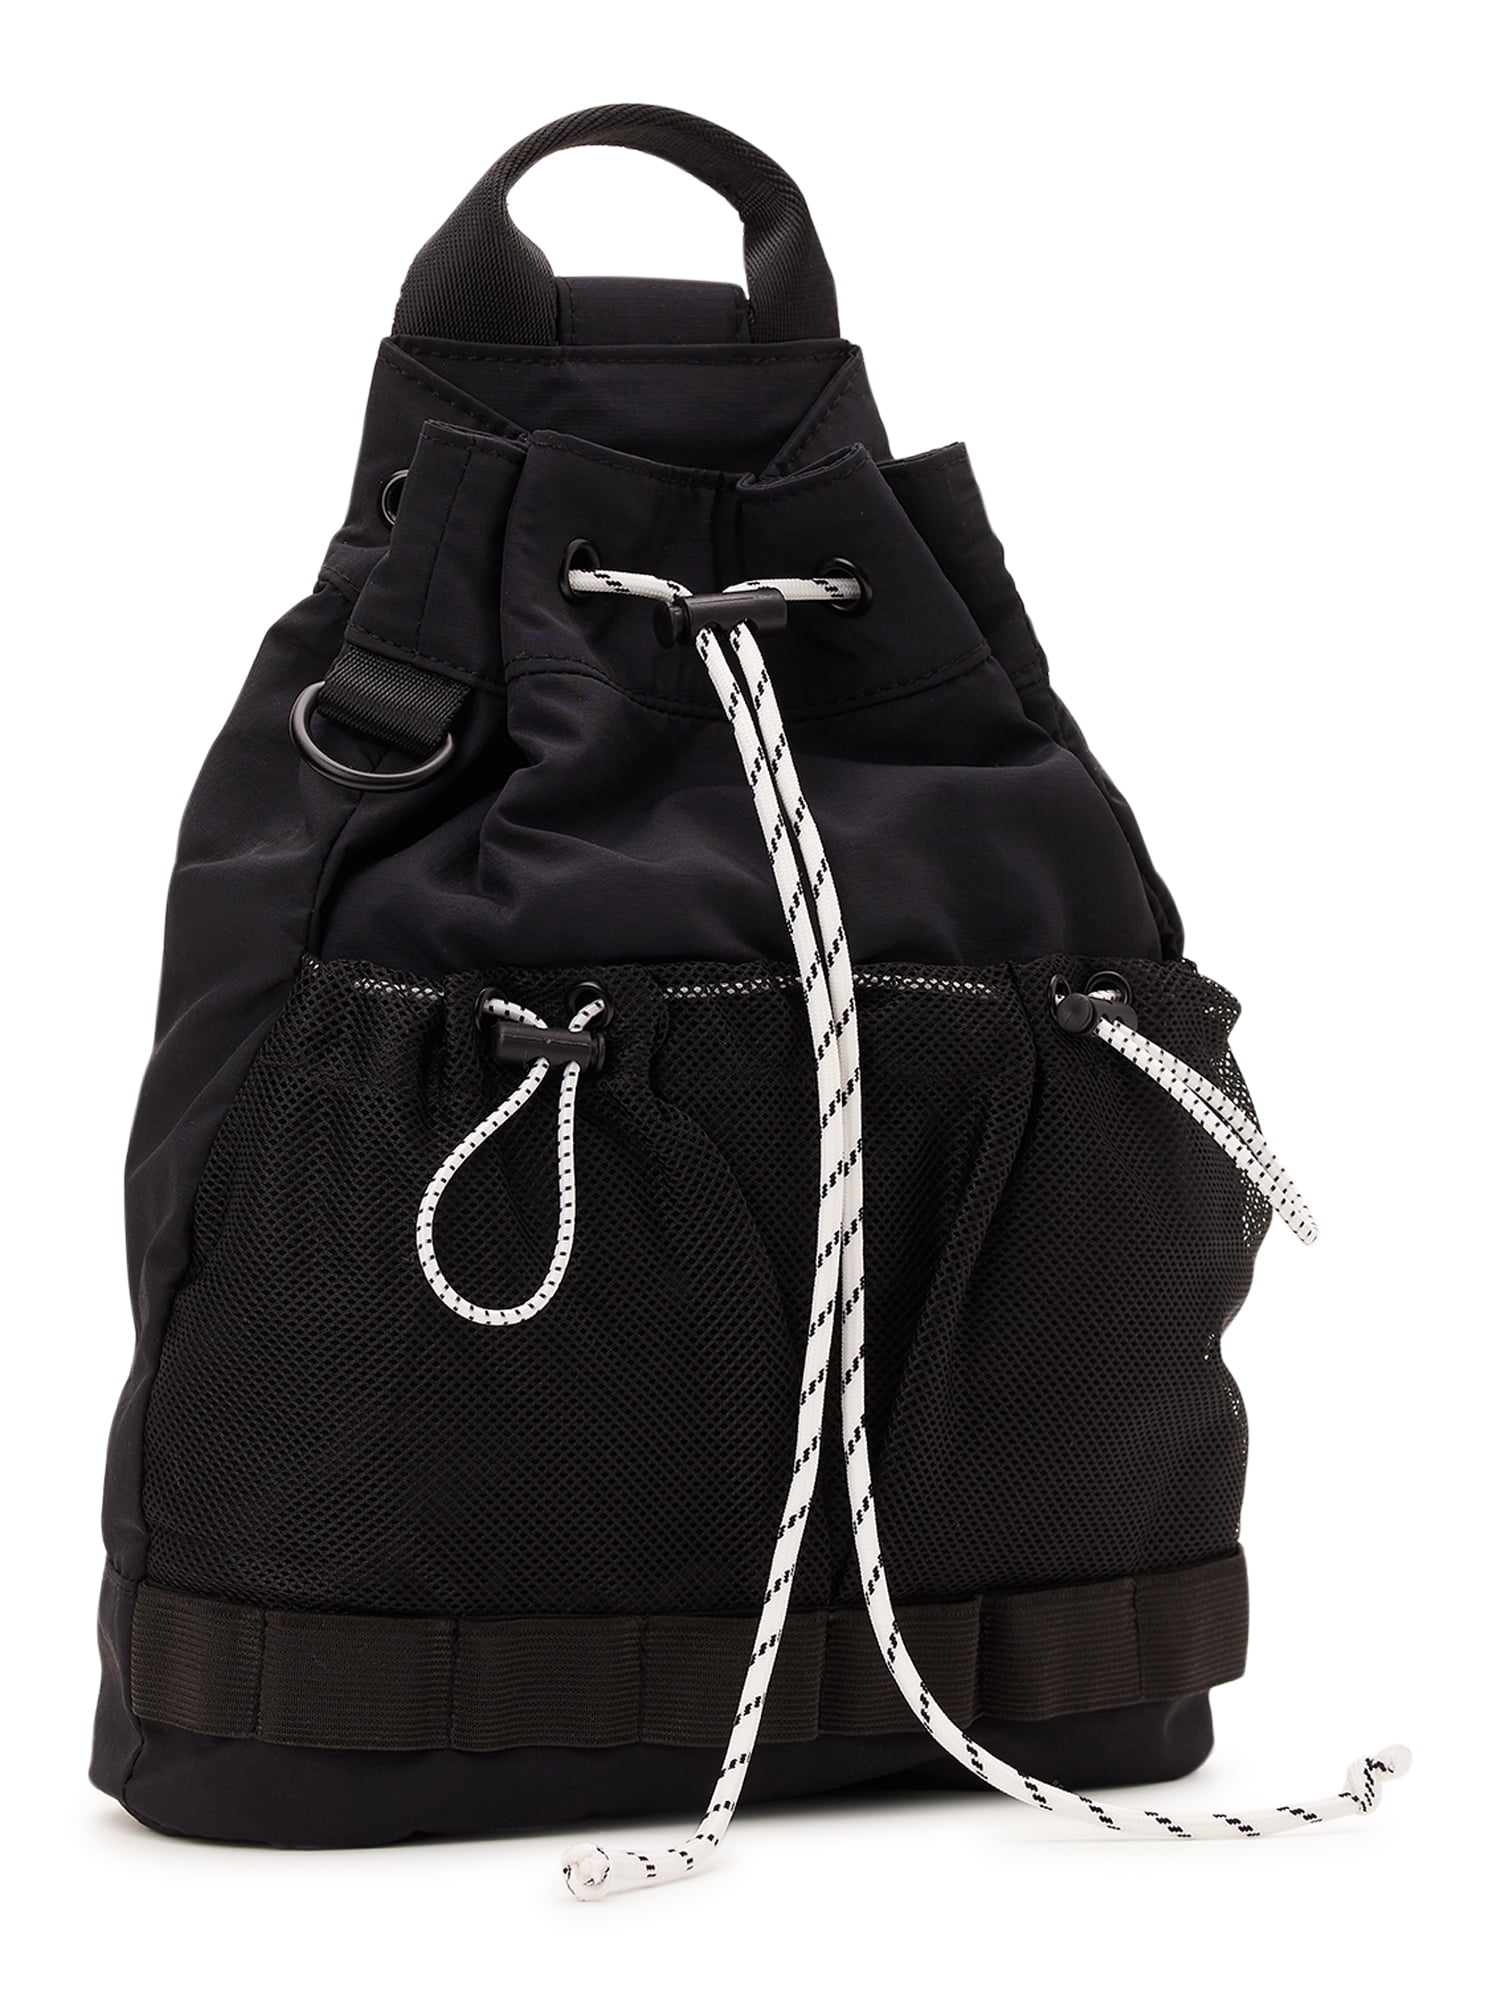 Athletic Works Women's Sling Backpack, Black, Size: One Size